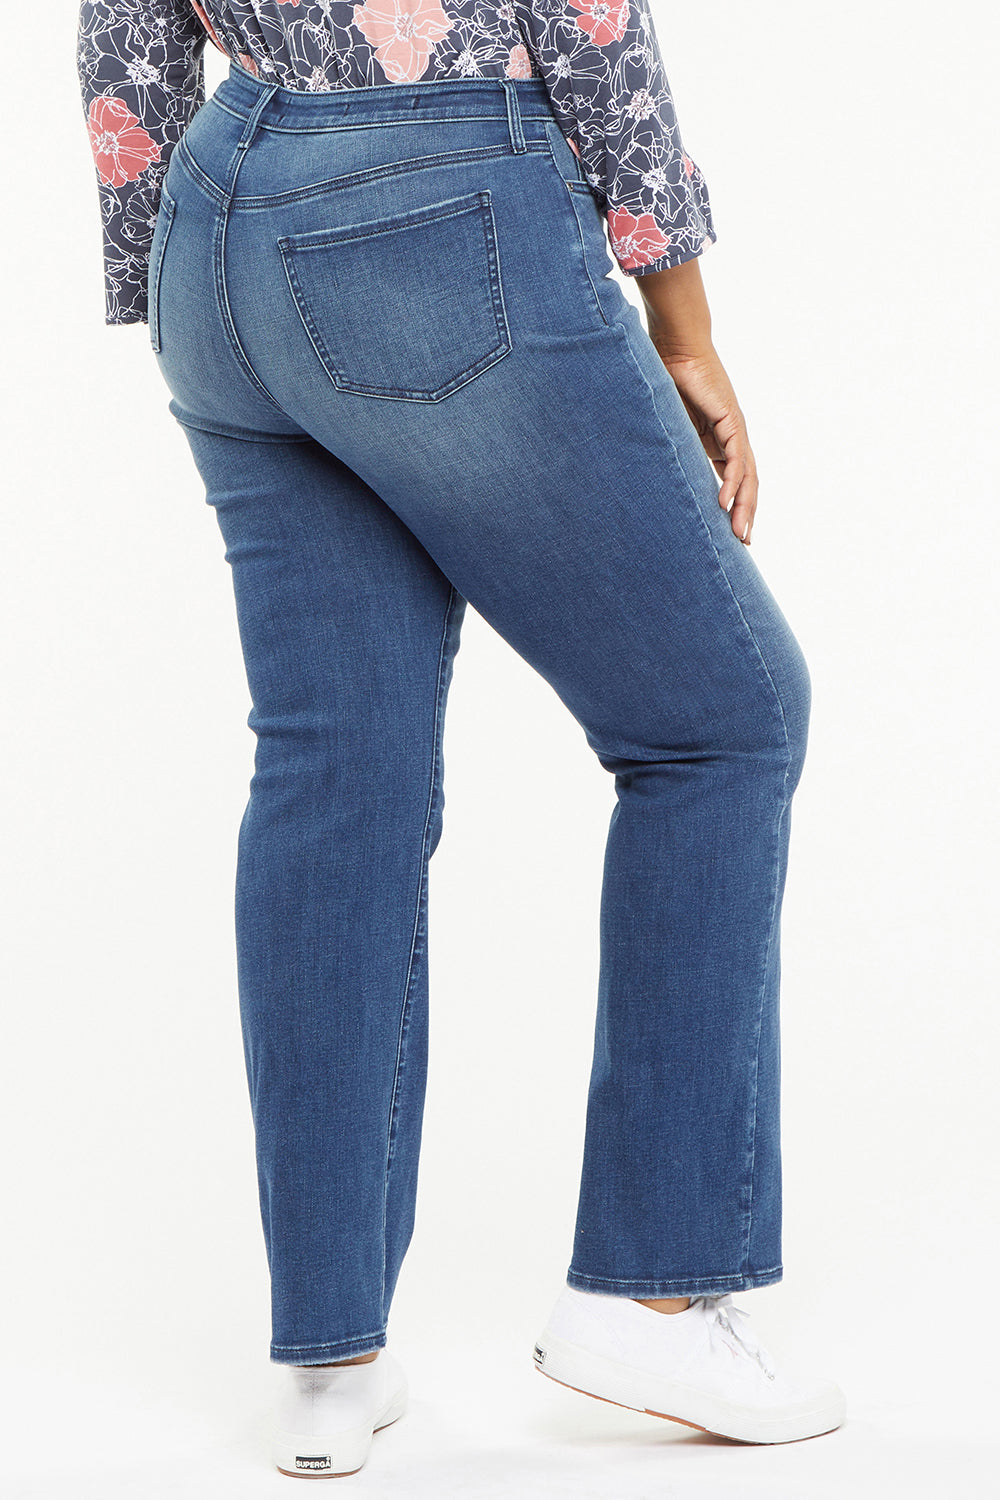 Marilyn Straight Jeans With High Rise And 31 Inseam - Kingston Blue